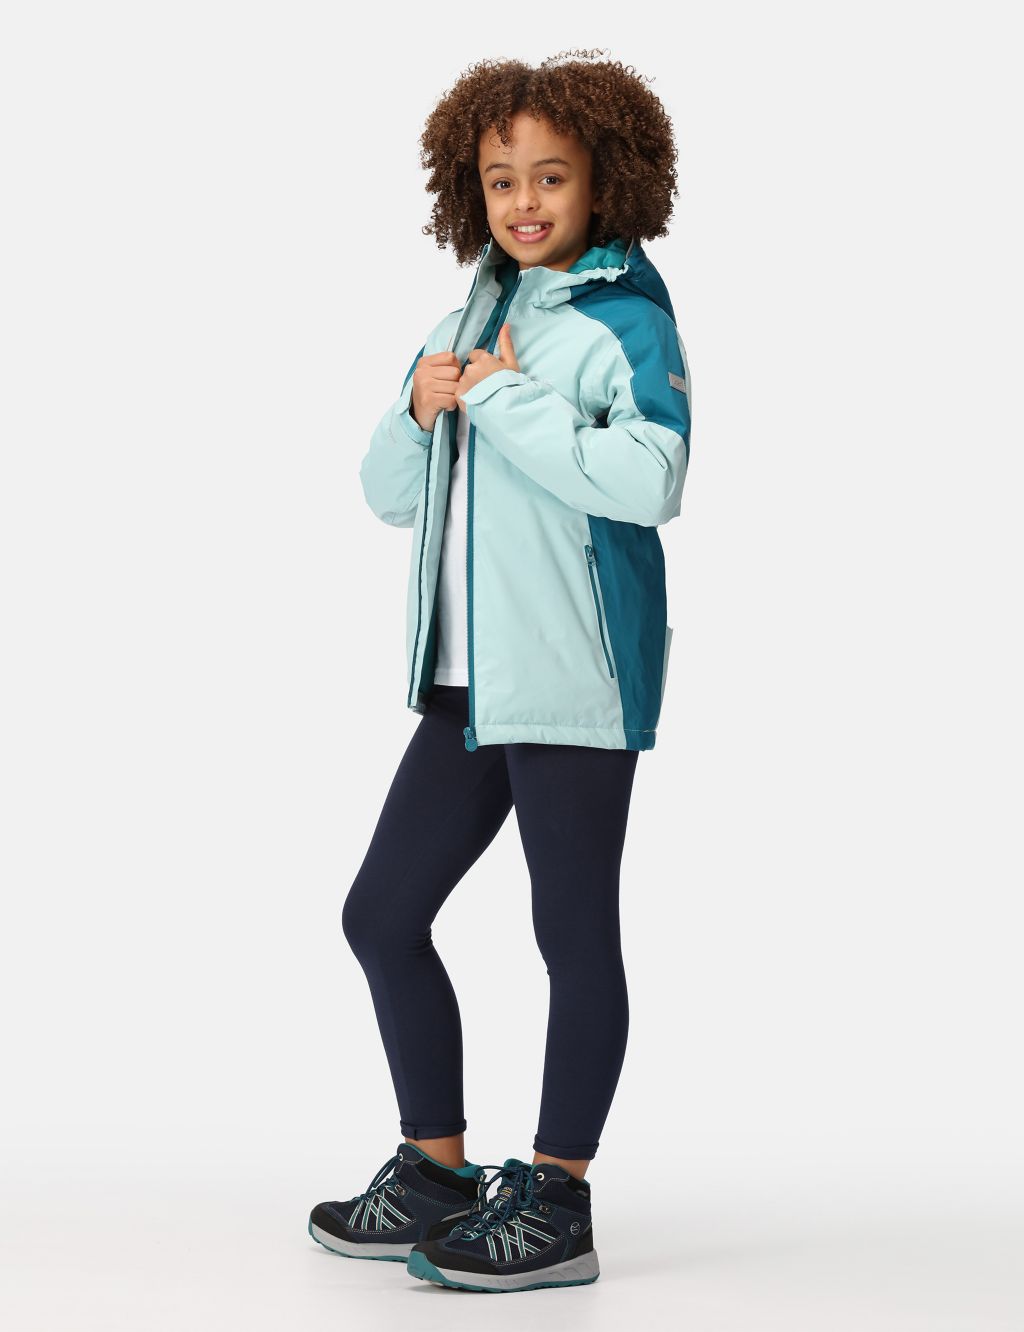 Hurdle IV Water-Repellent Hooded Jacket (3-14 Yrs) image 4